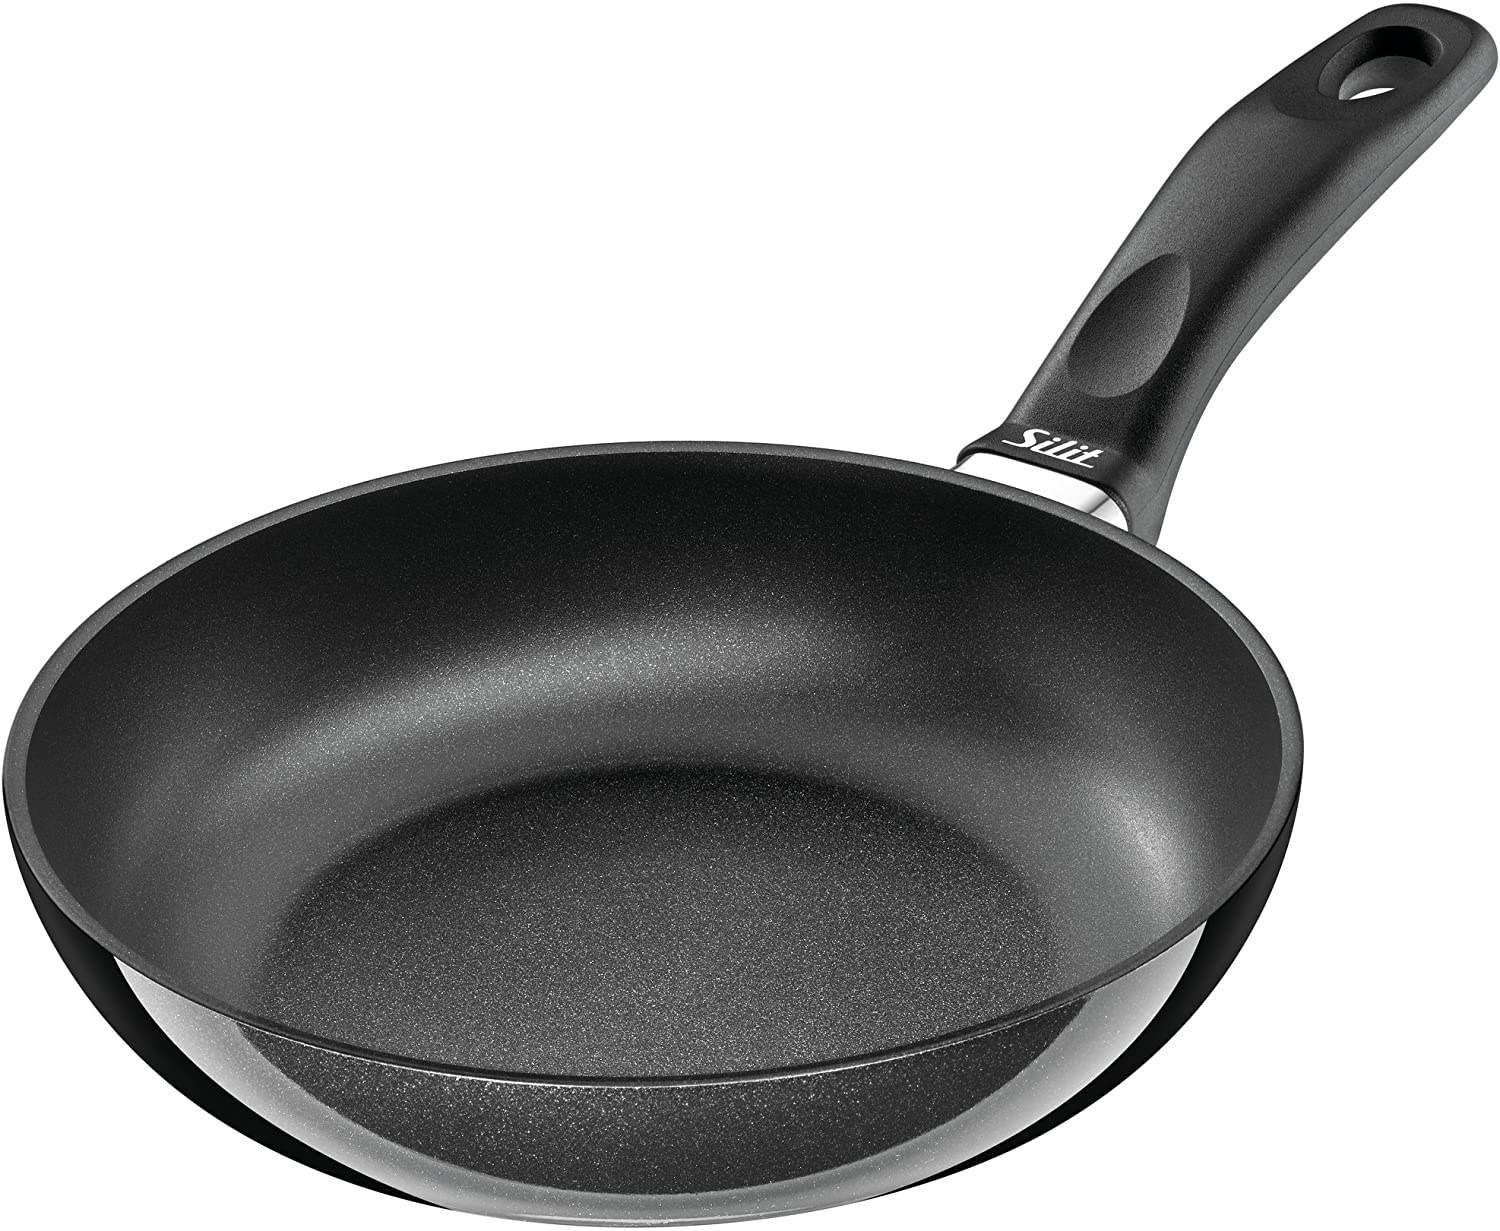 Silit Futura Frying Pan 20 cm Cast Aluminium Coated Plastic Handle with Flame Protection